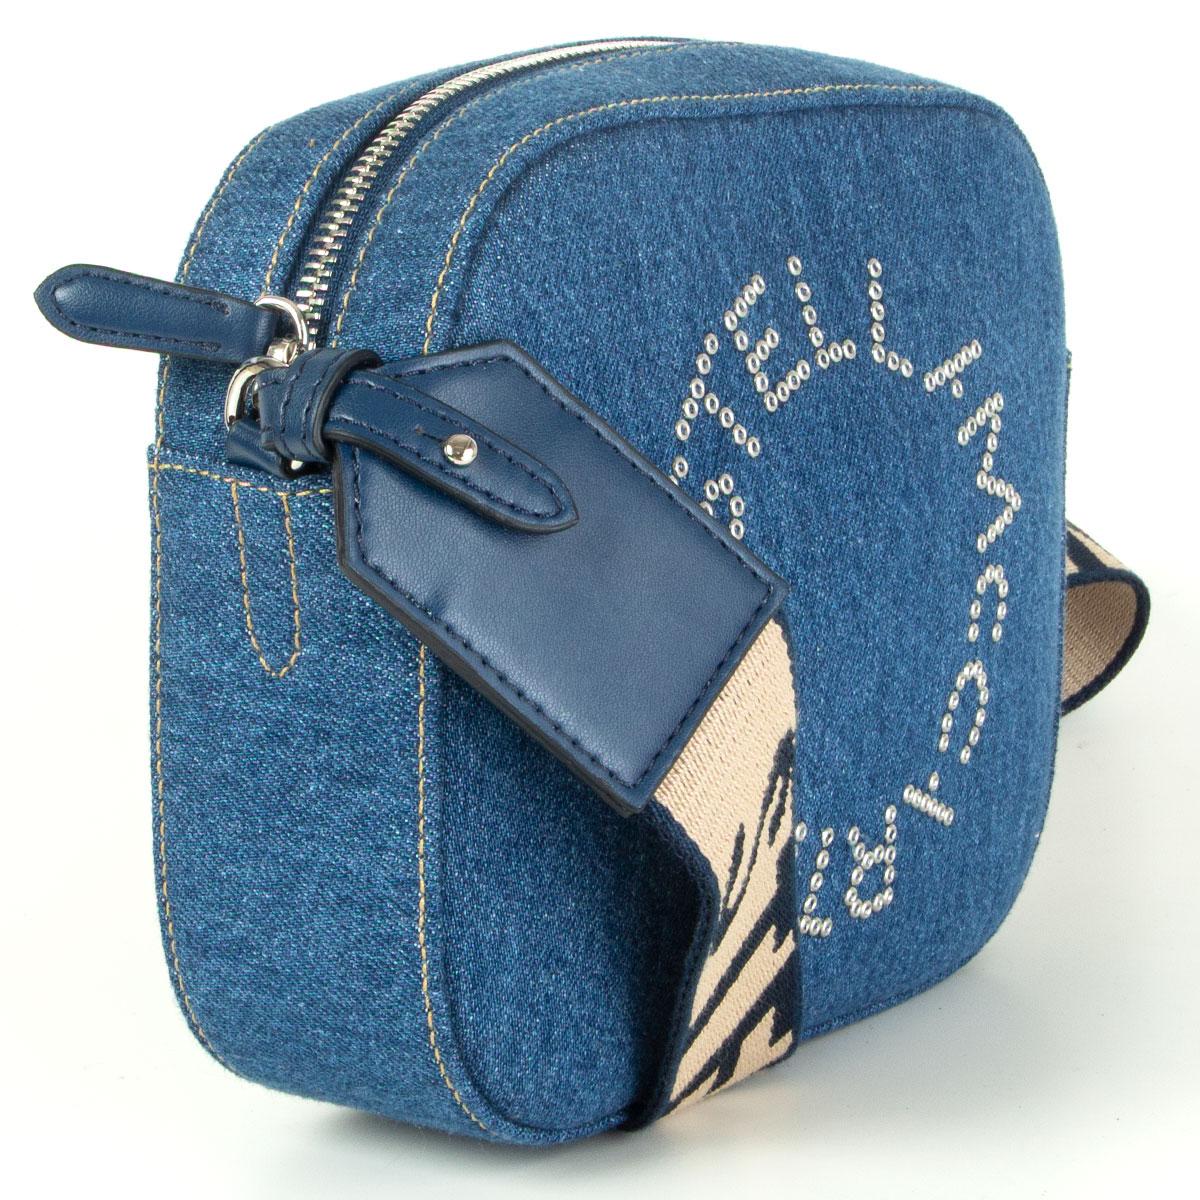 Stella McCartney denim logo mini camera bag in indigo cotton with faux leather details and an adjustable beige and navy blue logo shoulder strap. Open with a zipper on top and is lined in tan microfibre with one open pocket against the back. Brand